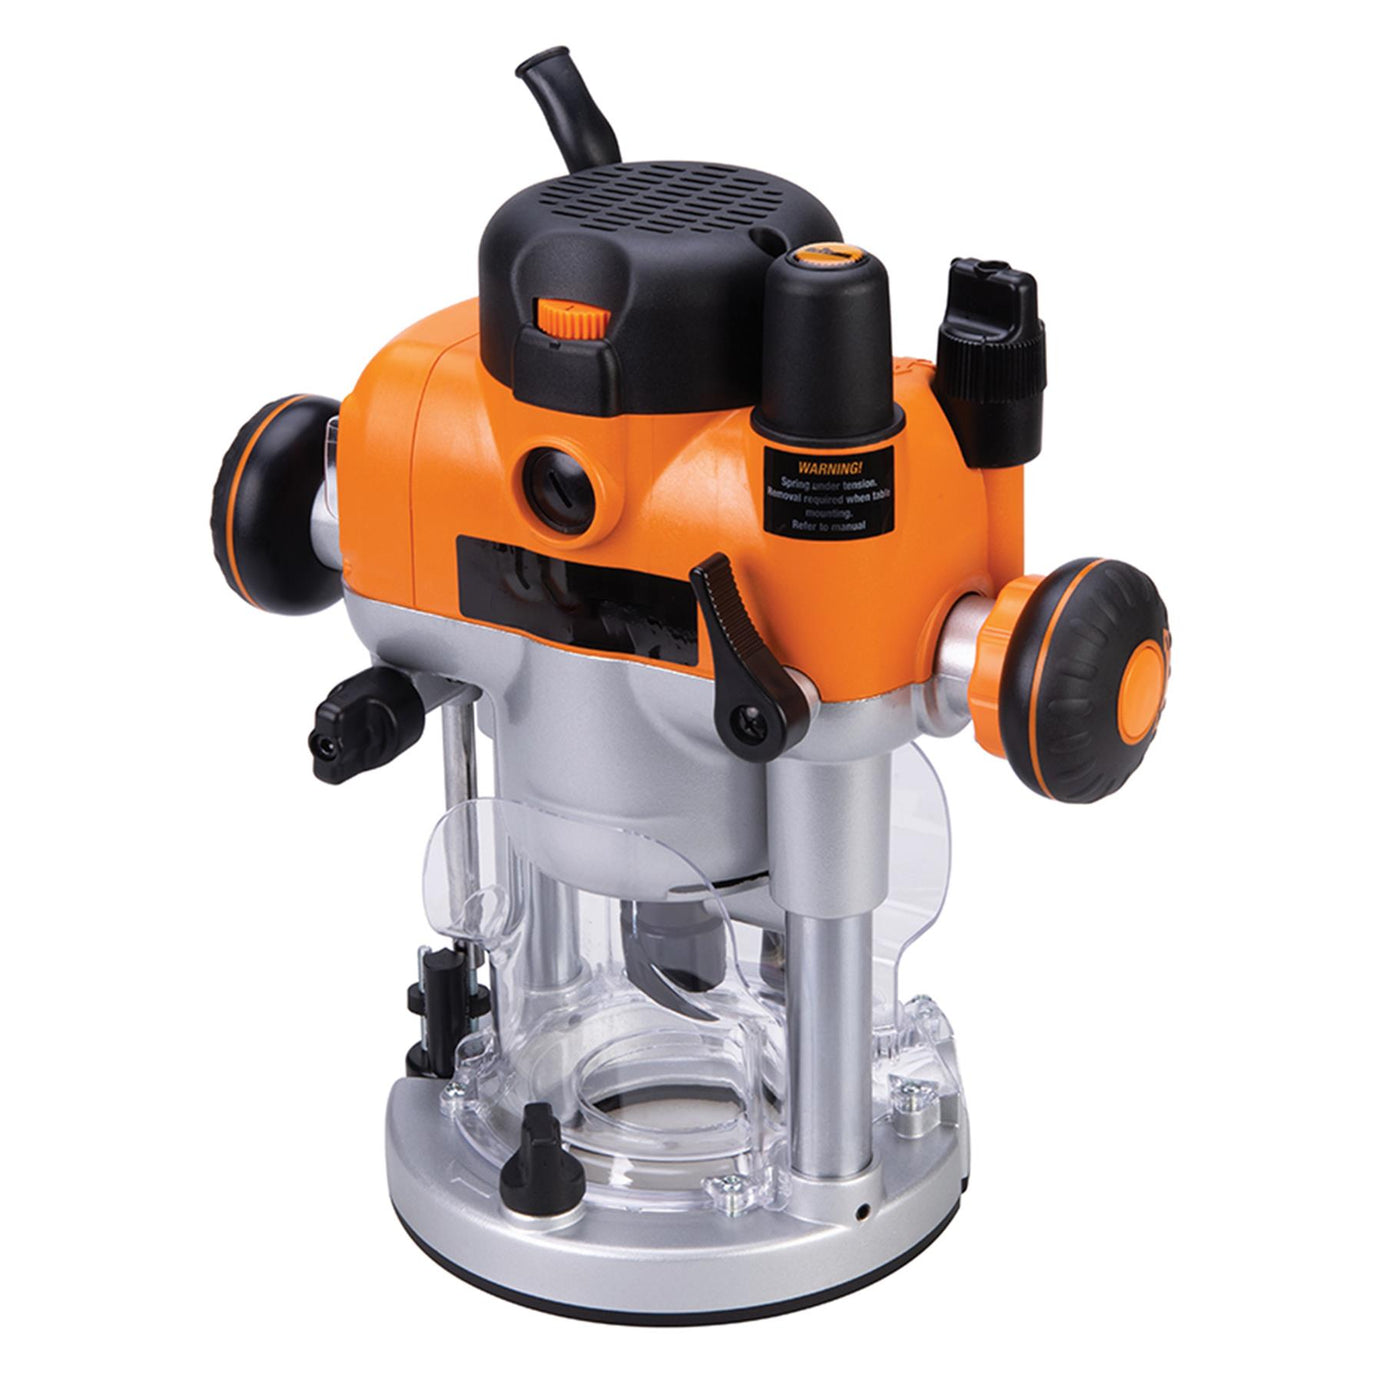 Heavy Duty TRA001 Dual Mode Precision Plunge Router 2400W Brand New DIY